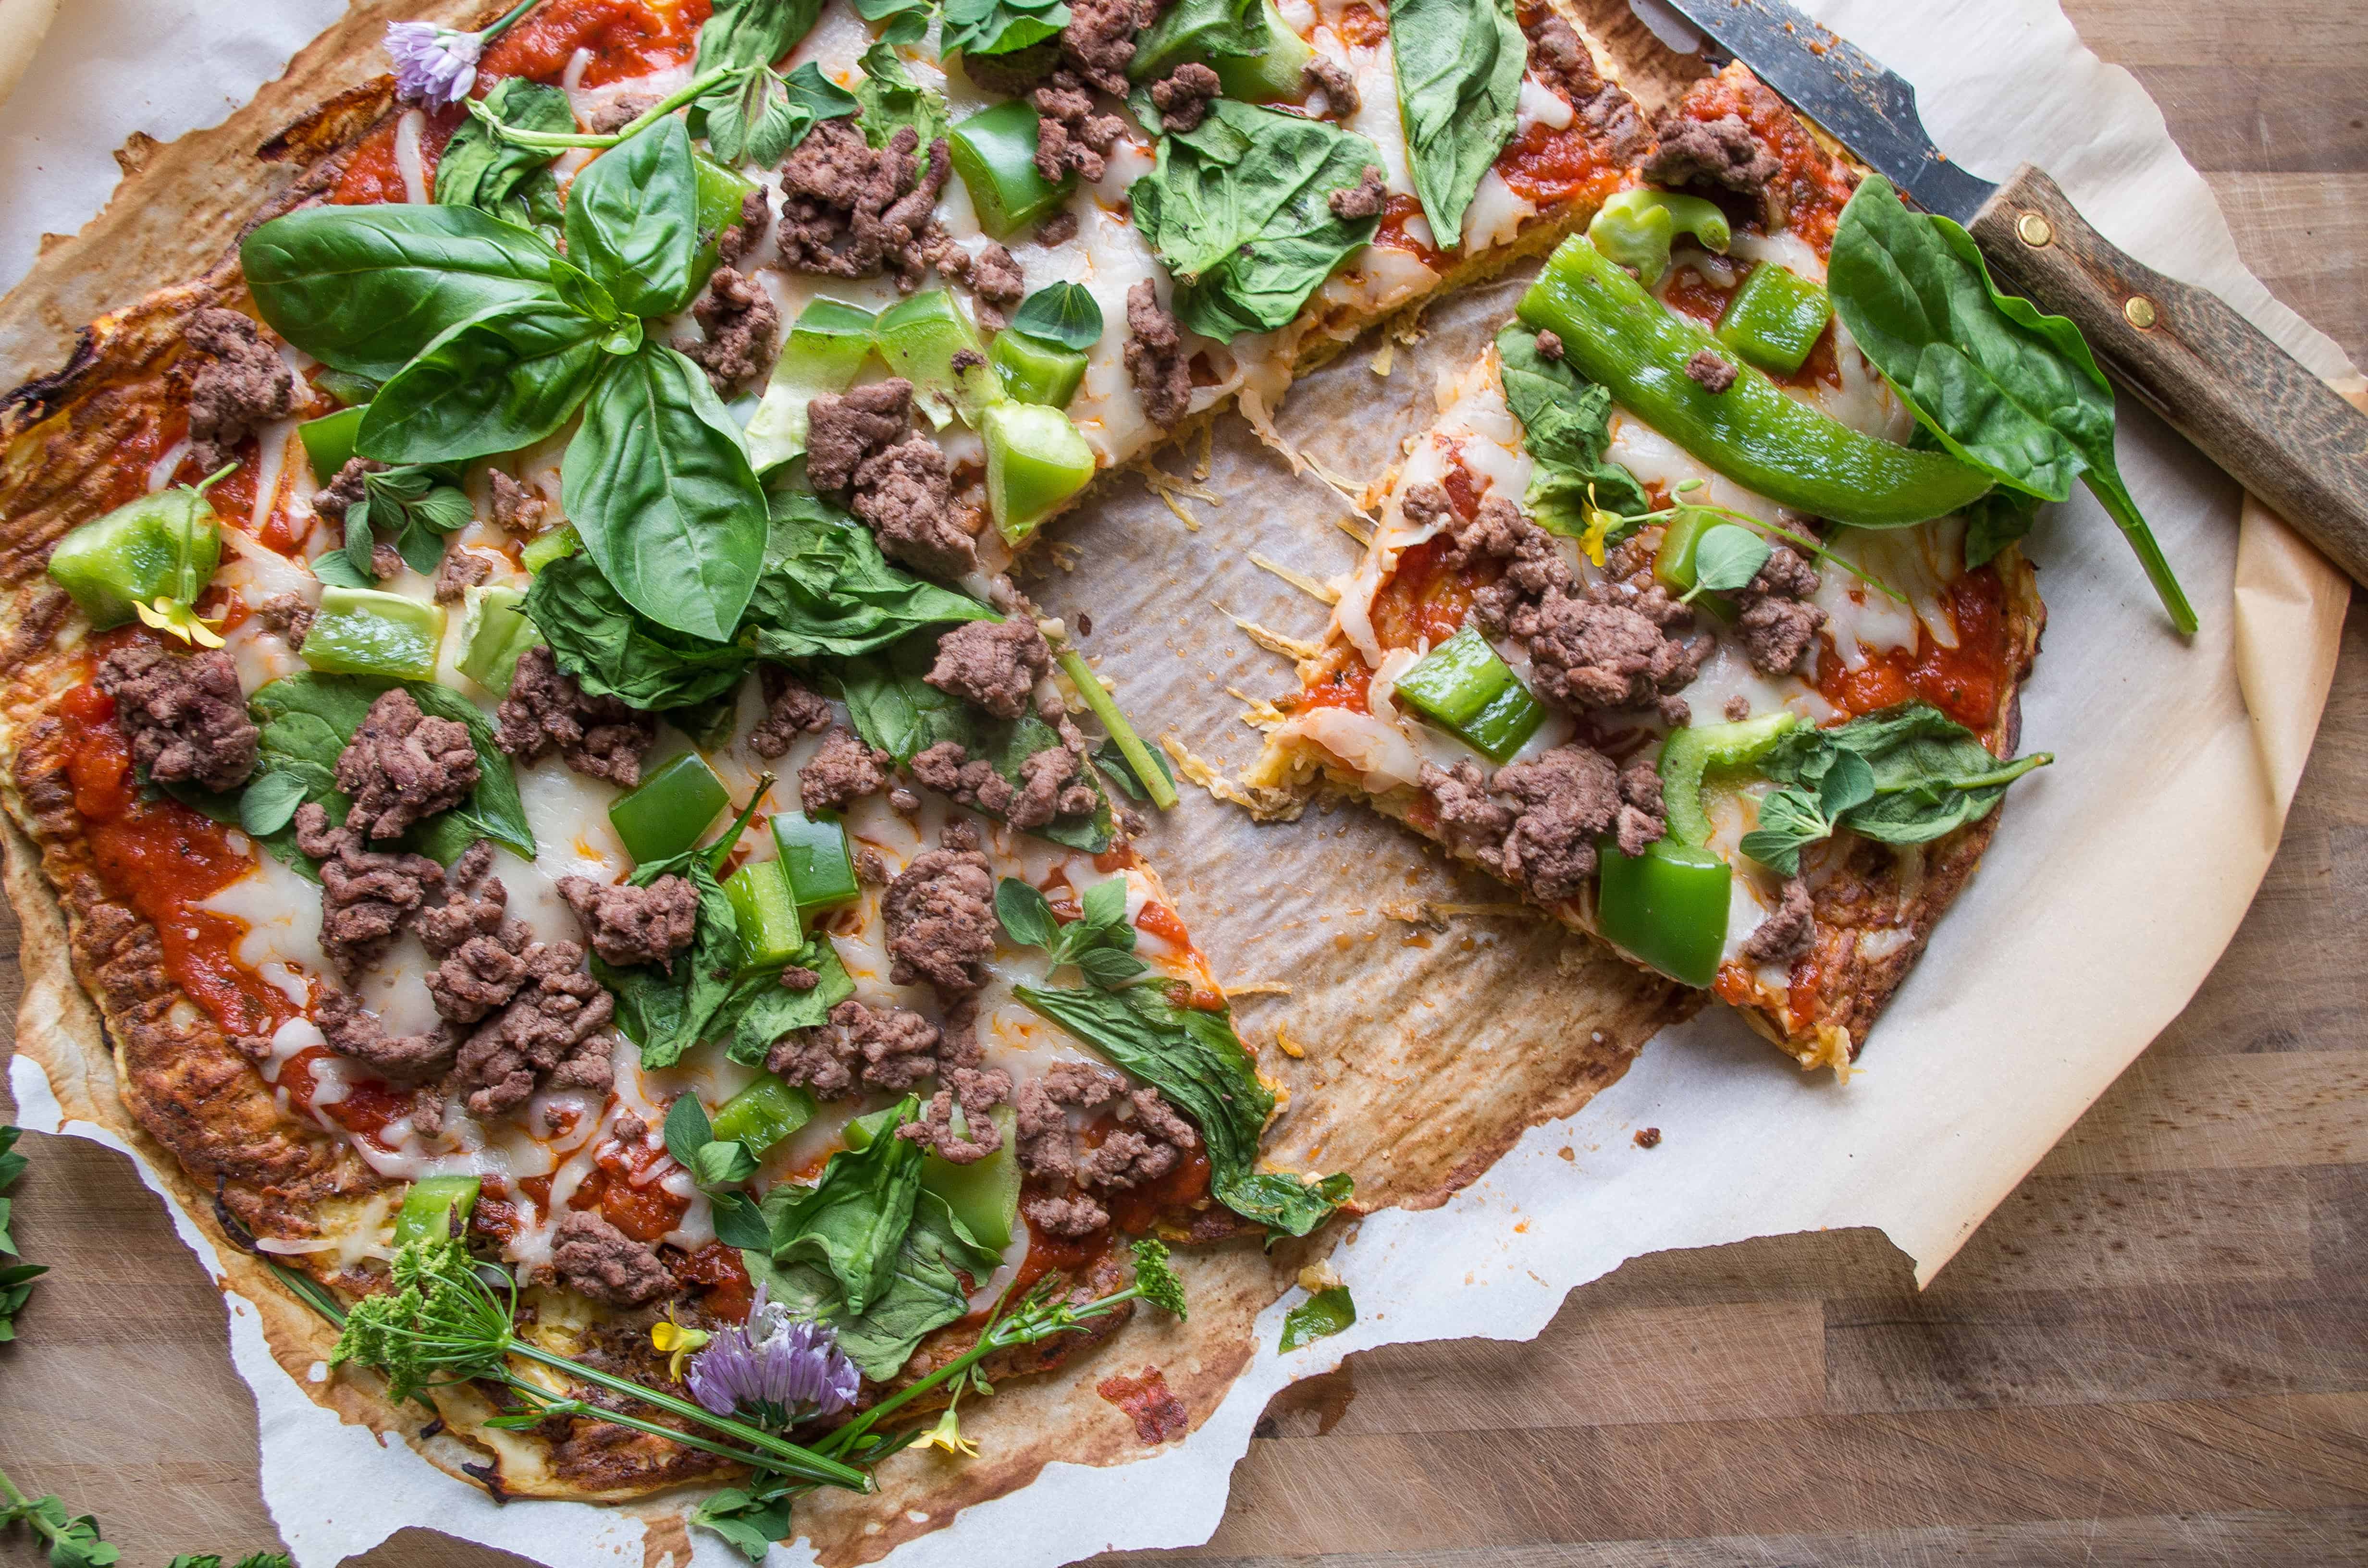 Spaghetti Squash Crust Pizza-perfect healthy low carb pizza night in less than 45 minutes! |thekitcheneer.com